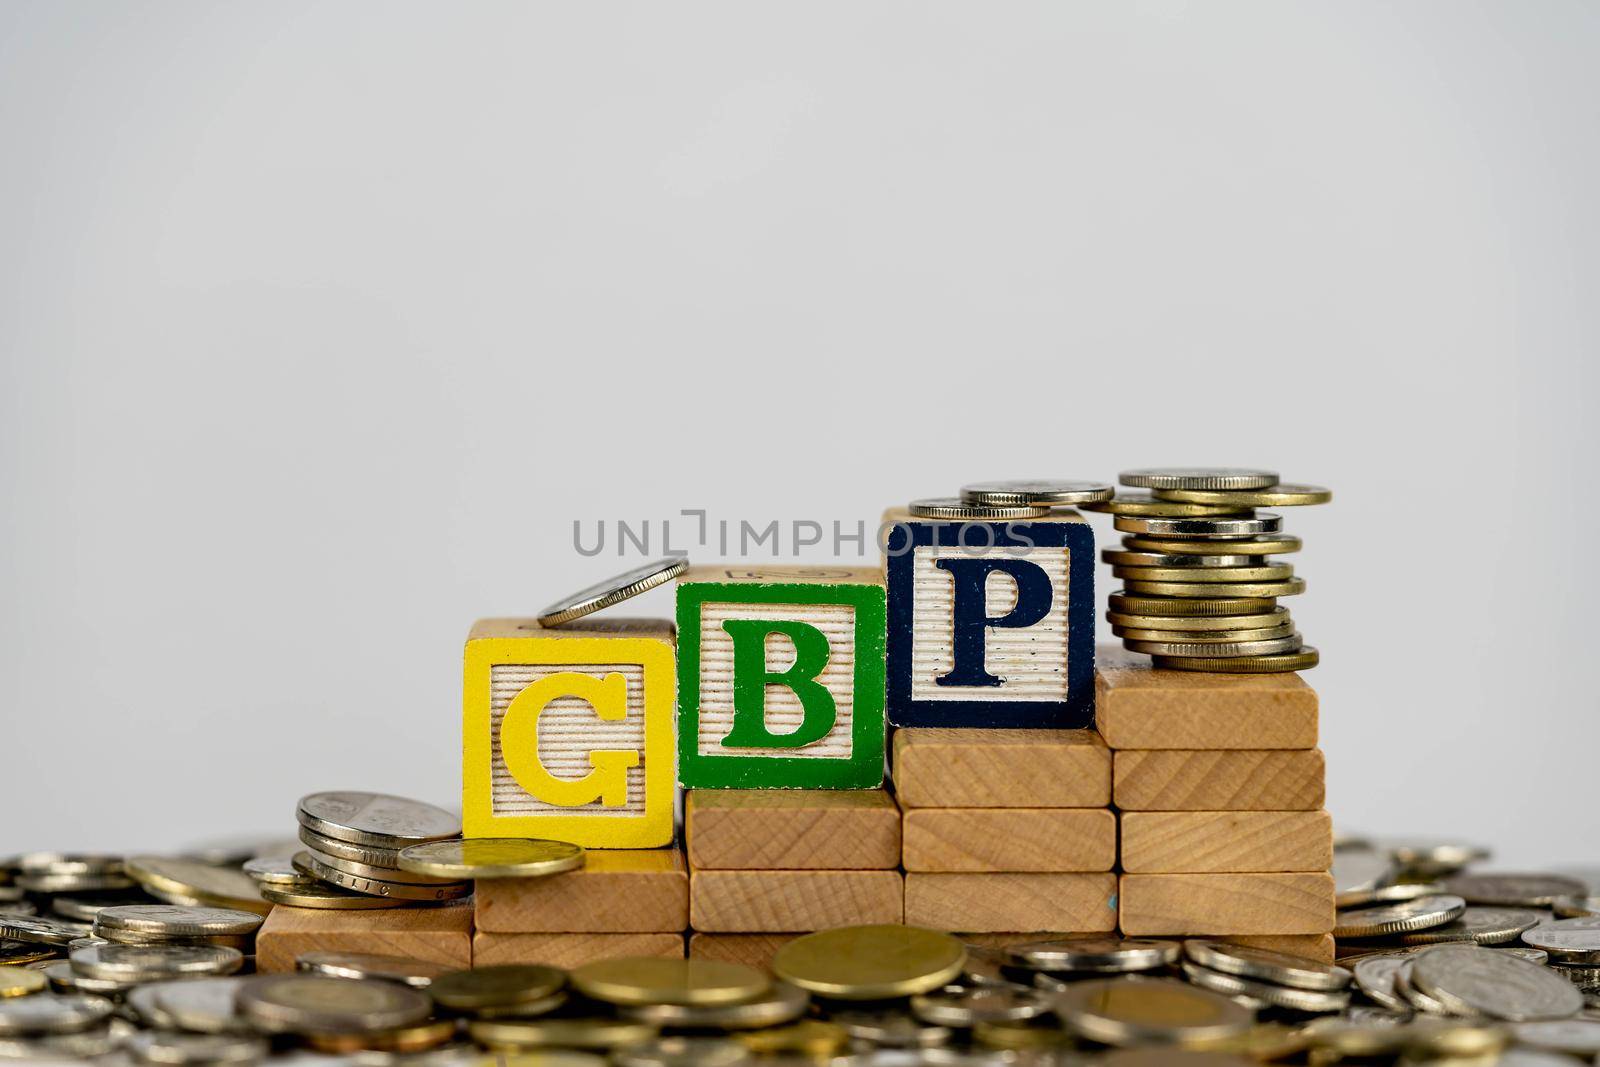 Forex GBP concept with wooden blocks and coins. Forx GBP letters on wooden blocks sorrounded with money